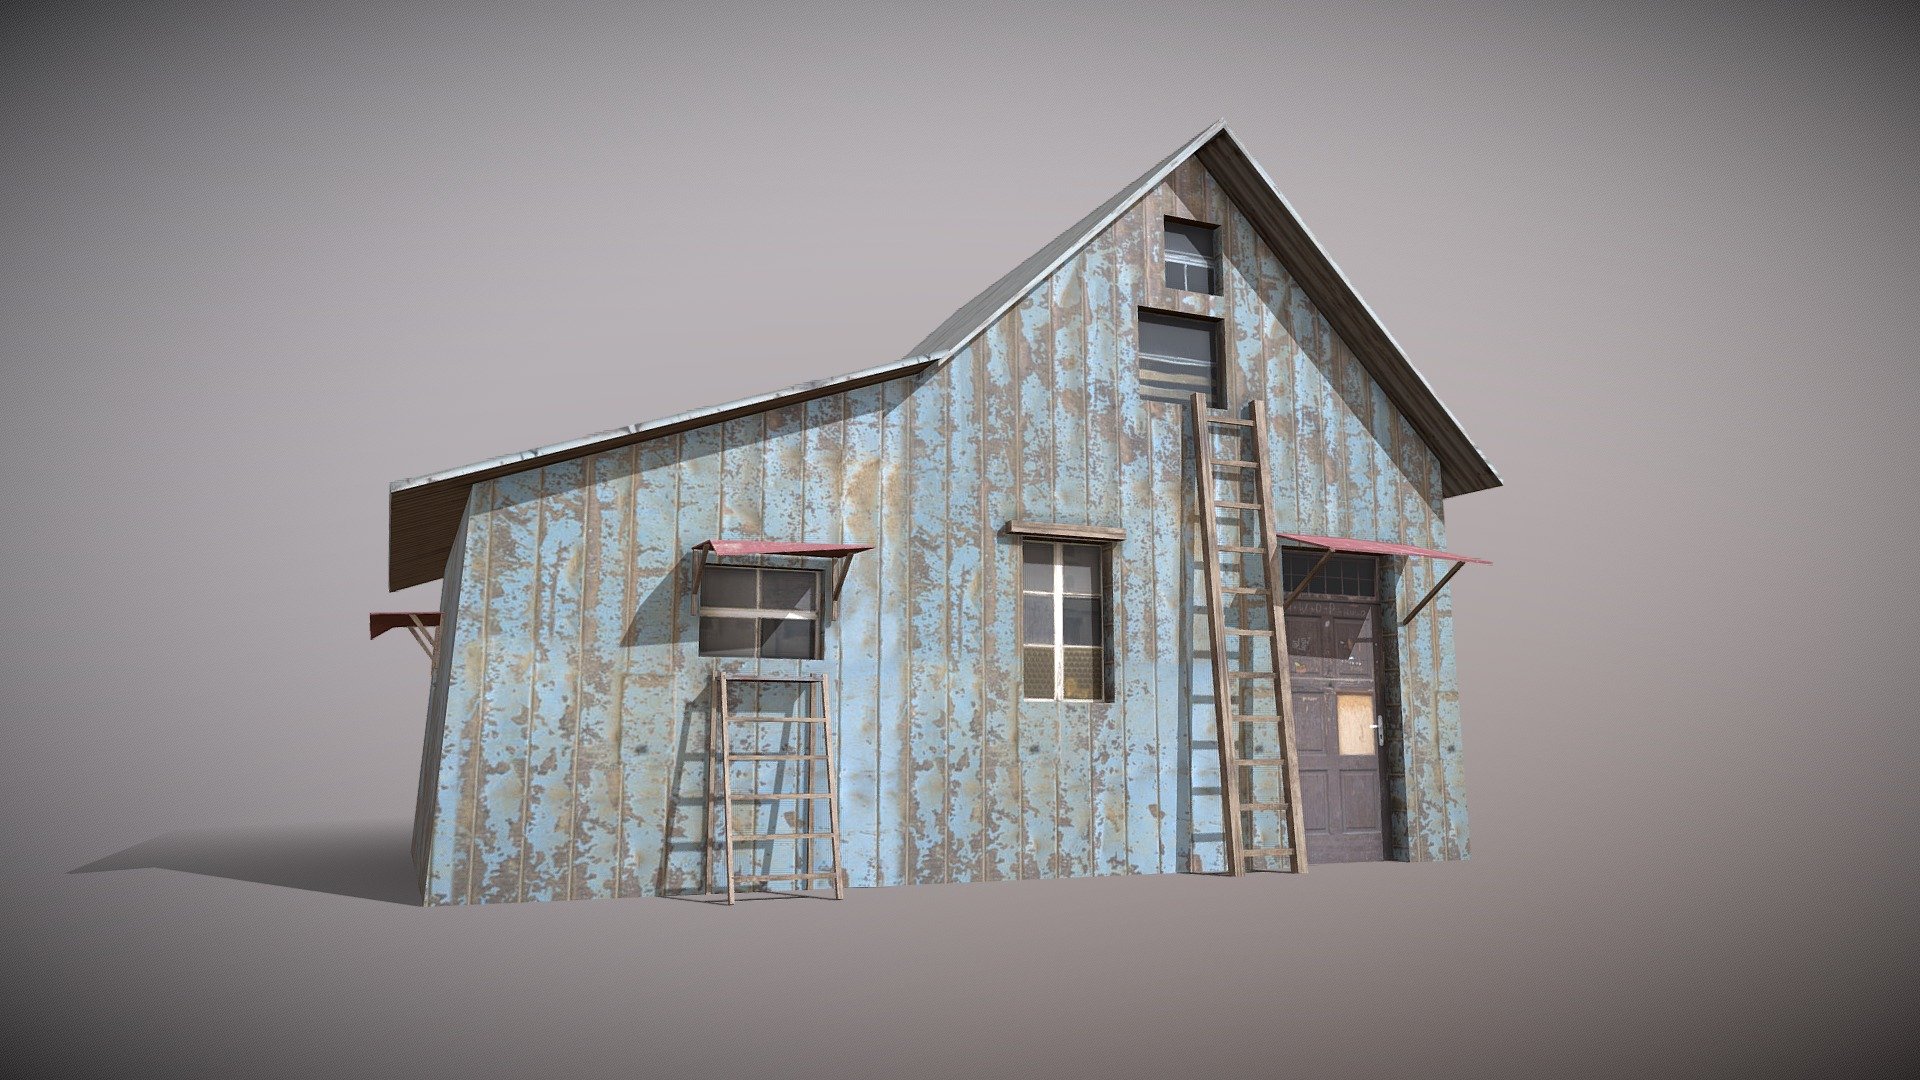 Game Ready 3D Old House /slum Native file format 3Ds max 2022 Other formats Blender 4.0 ,FBX, OBJ, All formats include materials &amp; textures

Polygons- 463 Vertices - 570

Materials &amp; textures. 1 Diffuse Map 2048x2048 - Slum X3 - Buy Royalty Free 3D model by 3DRK (@3DRK98) 3d model